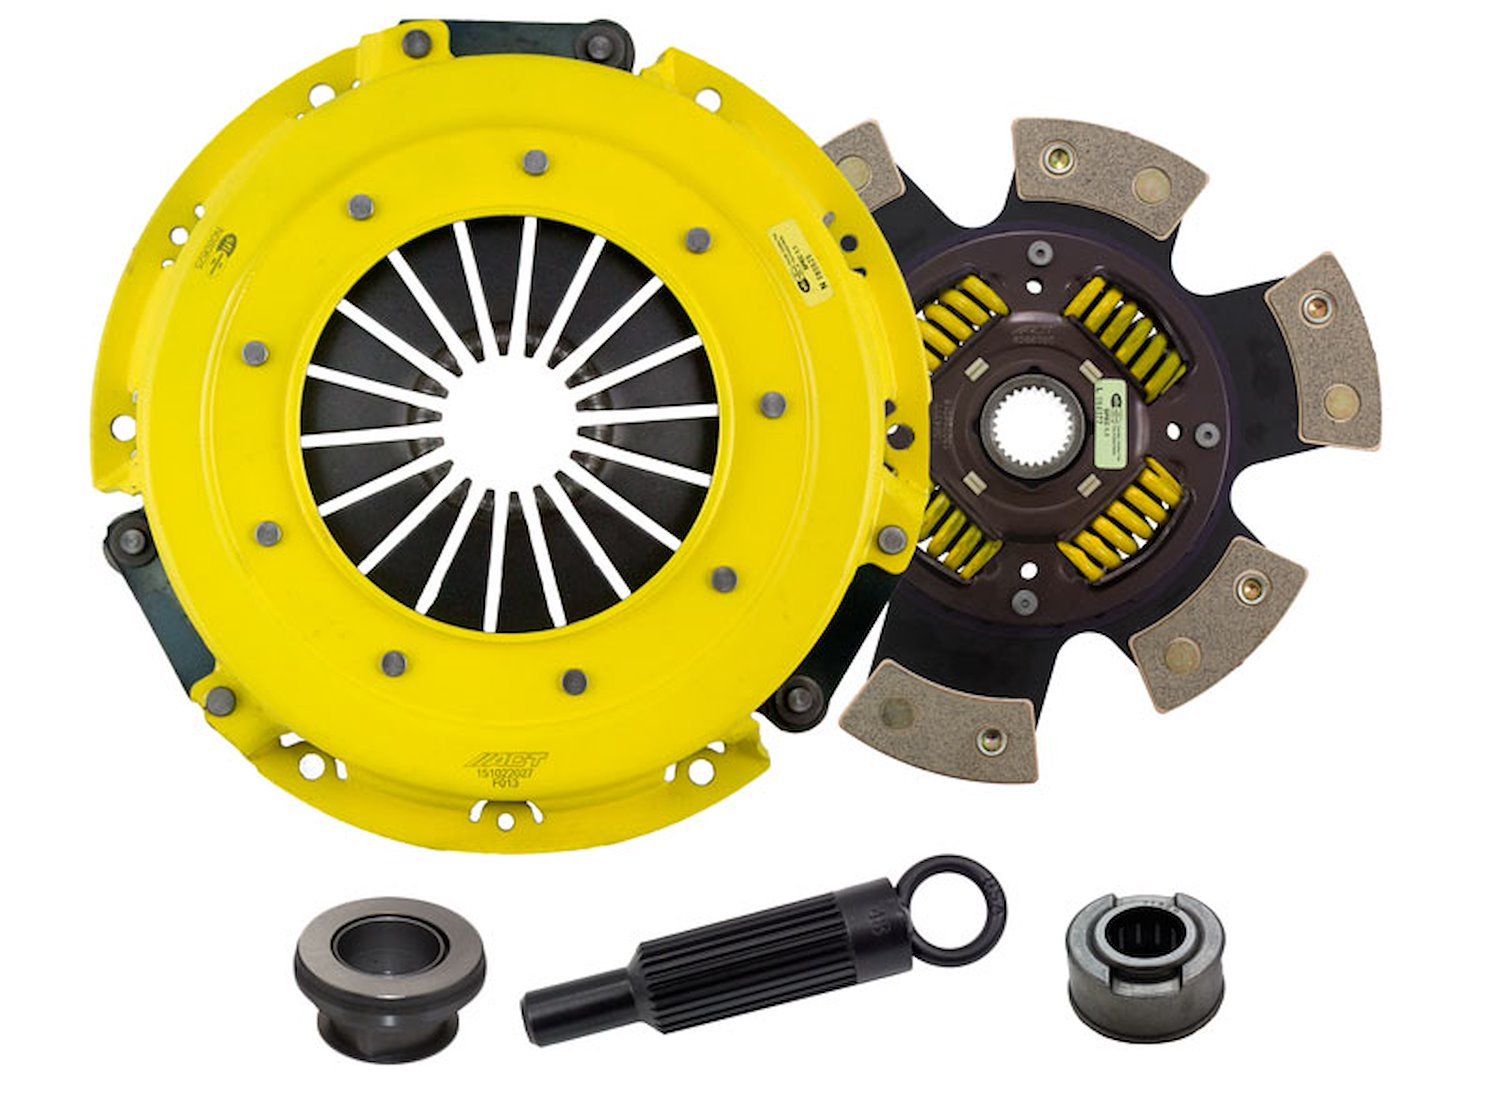 HD/Race Sprung 6-Pad Transmission Clutch Kit Fits Select